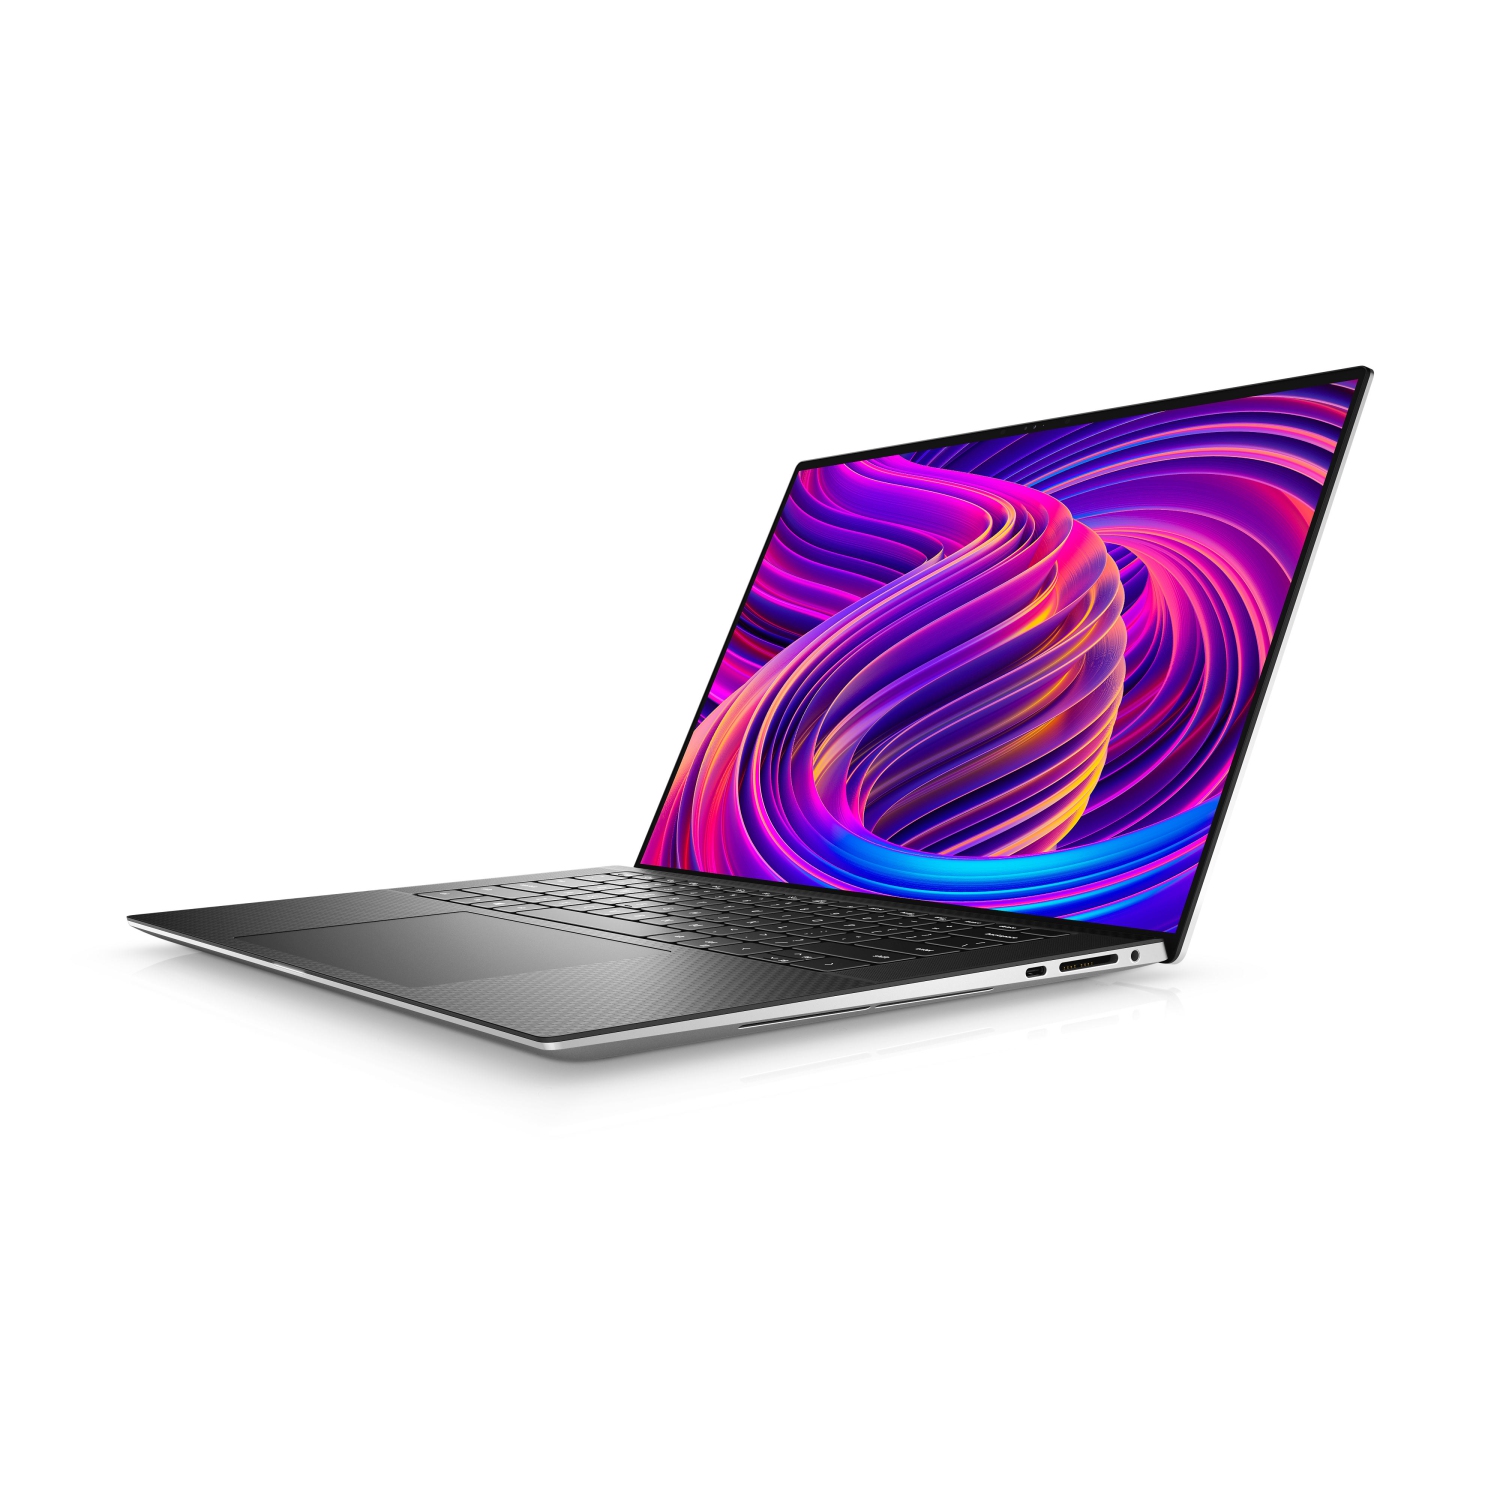 Dell XPS 15 9510 Laptop (2021) | 15.6" 4K Touch | Core i7 - 512GB SSD - 16GB RAM - RTX 3050 | 8 Cores @ 4.6 GHz - 11th Gen CPU